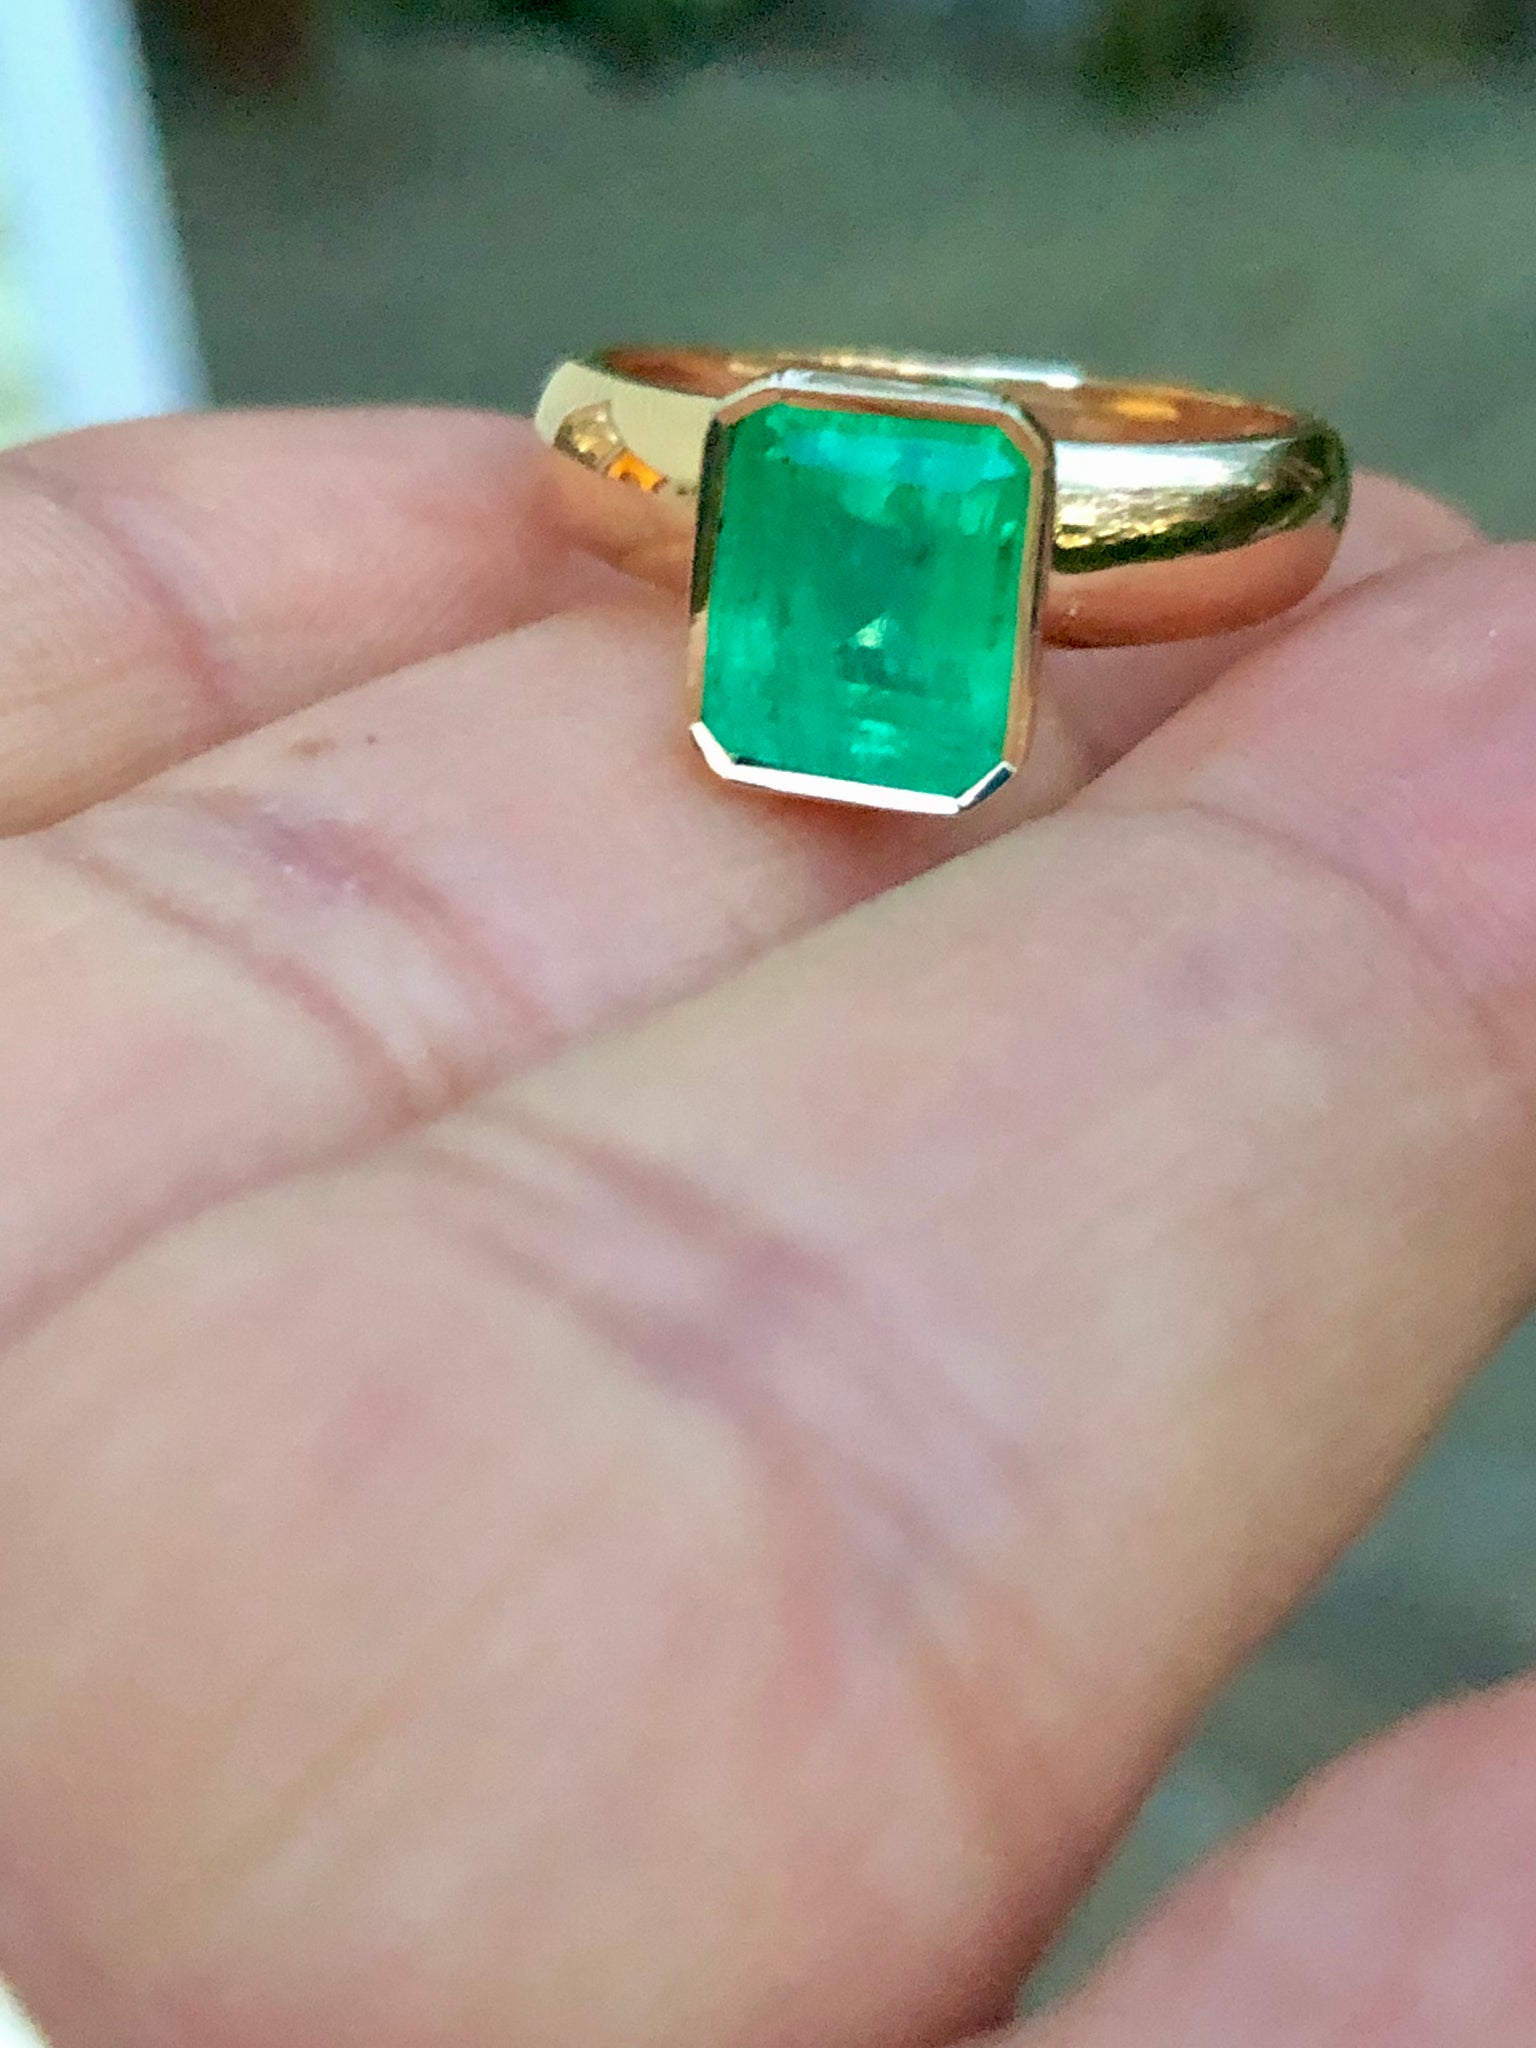 2.68 Carat Natural Colombian Emerald Solitaire Engagement Ring 18K